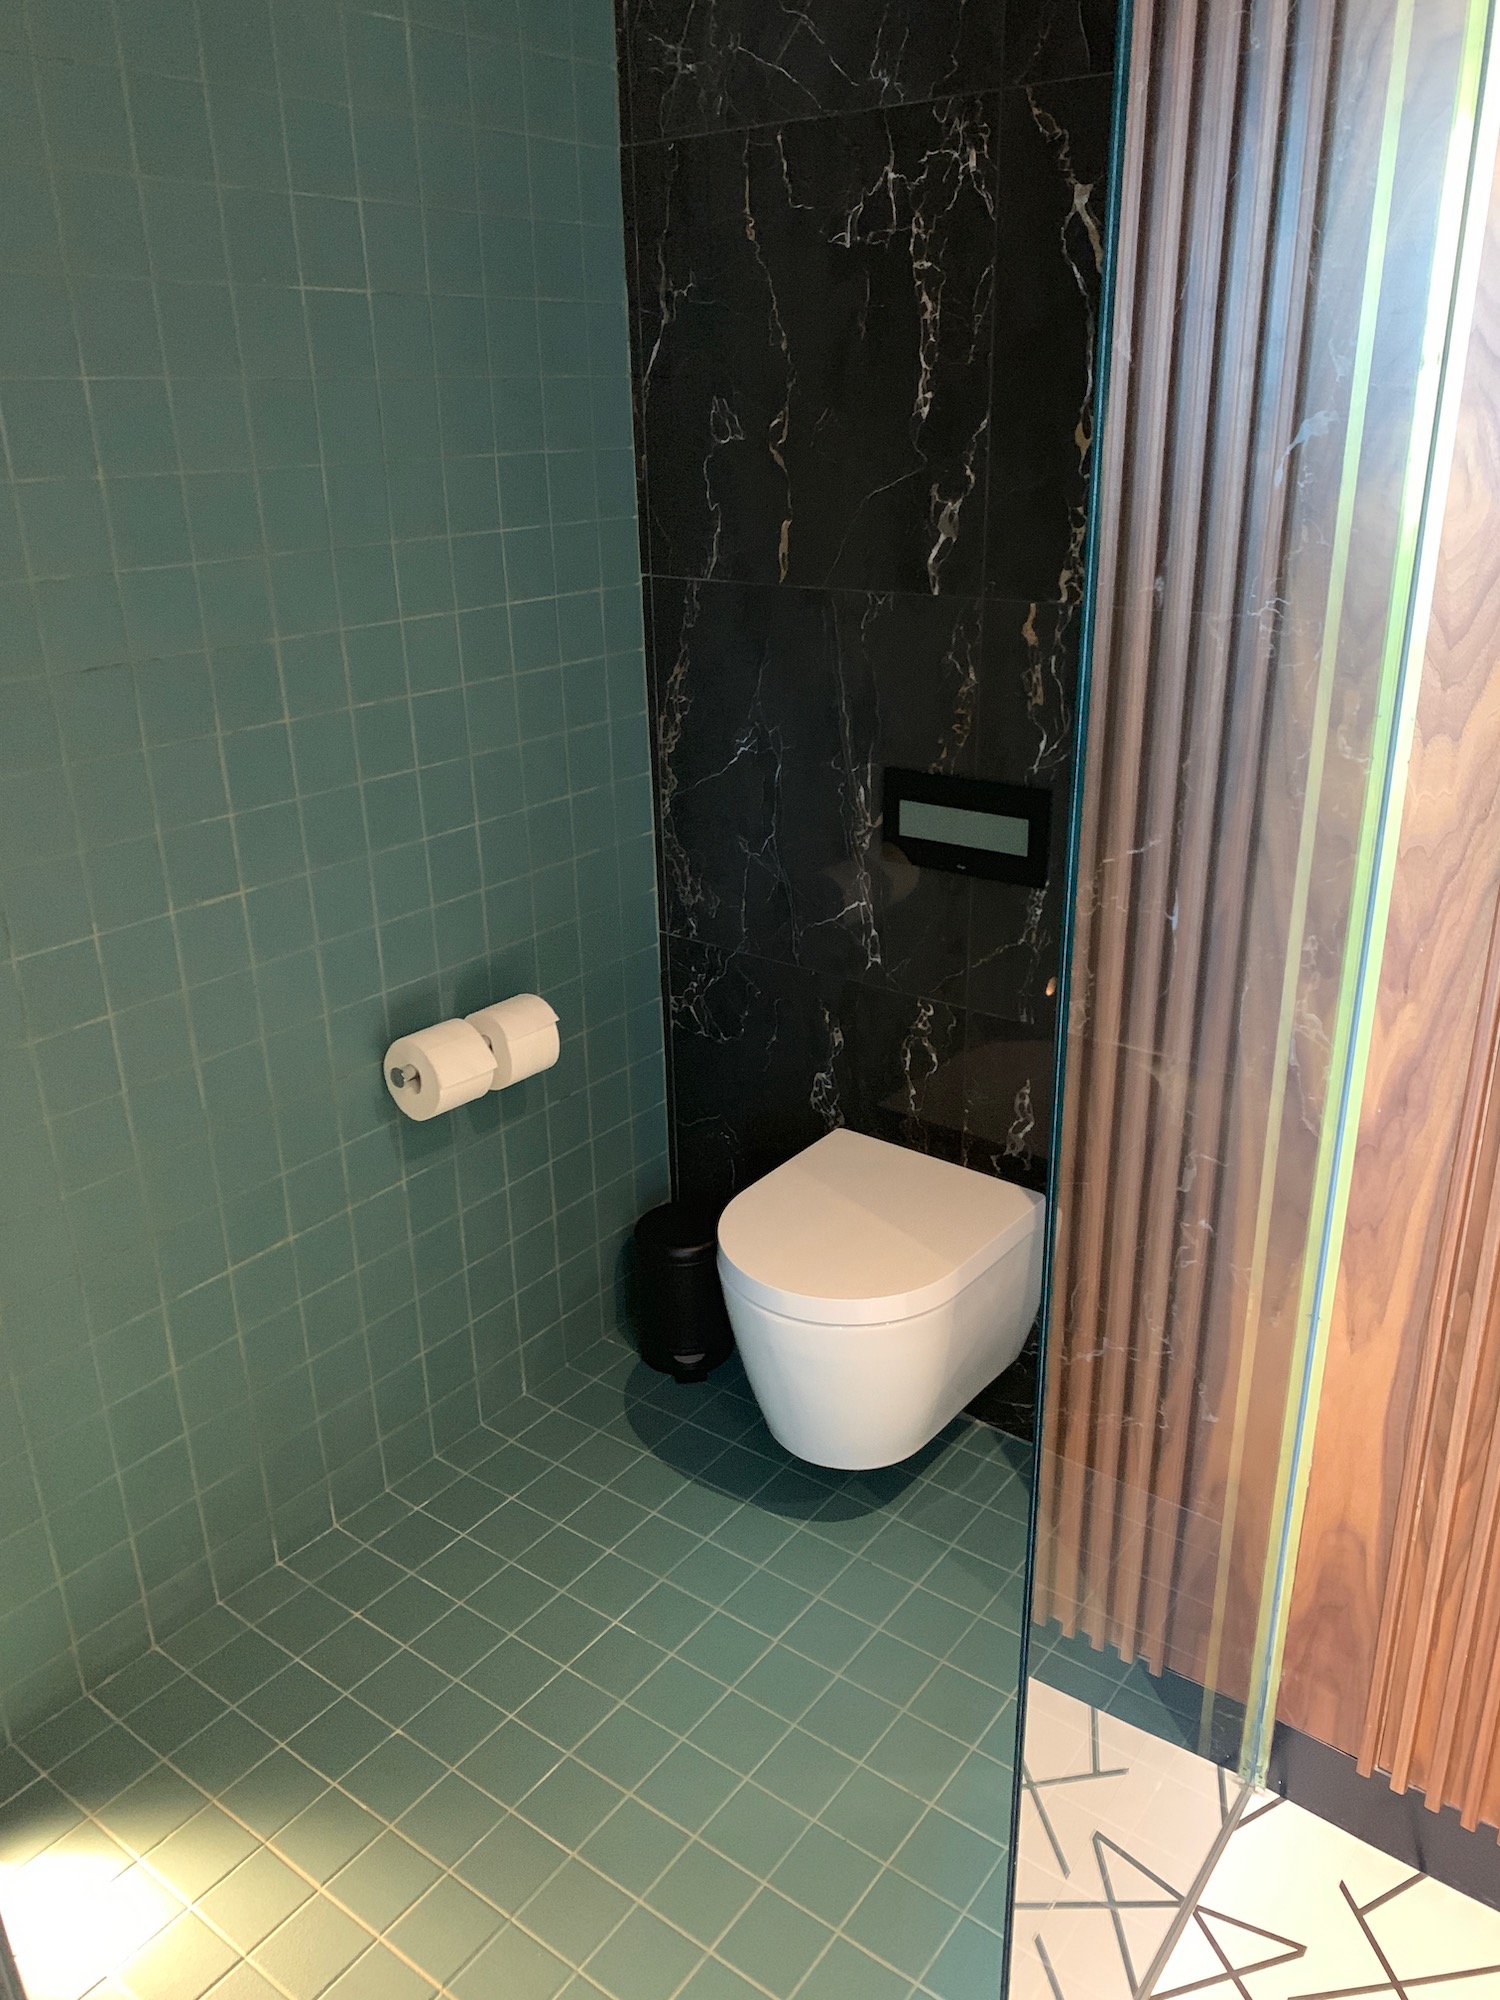 a bathroom with a toilet and a roll of toilet paper